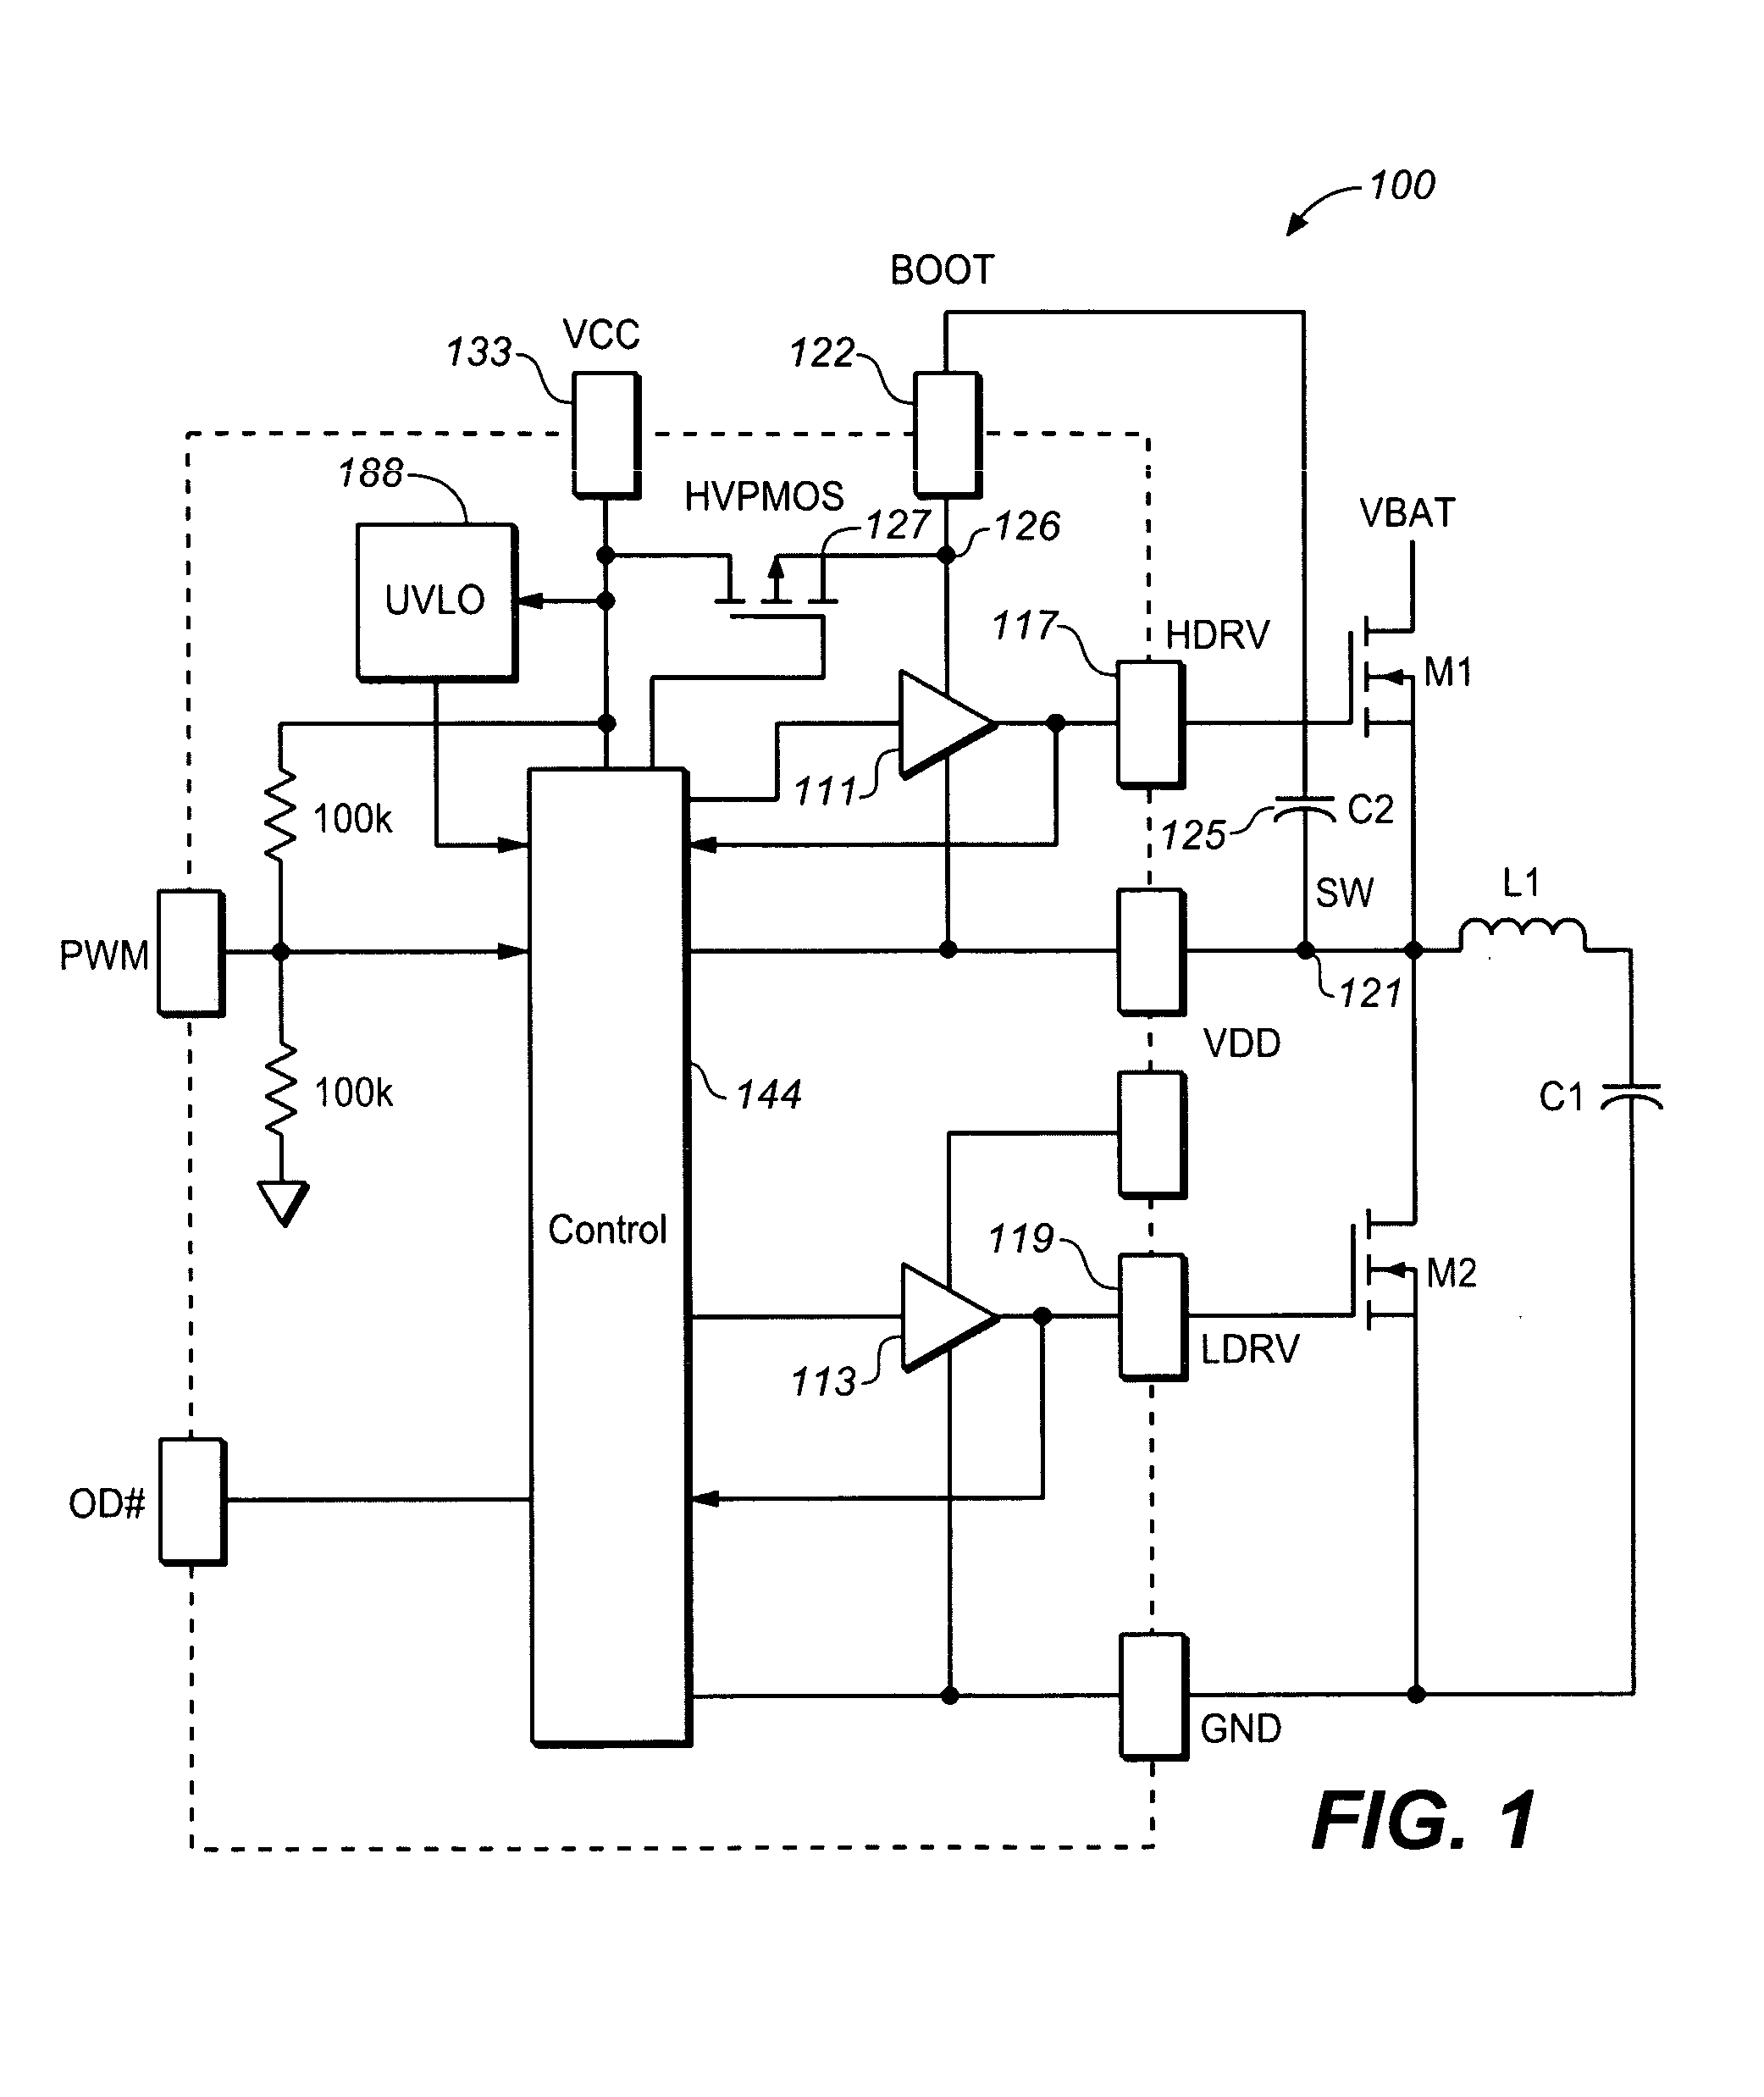 High voltage integrated circuit driver with a high voltage PMOS bootstrap diode emulator